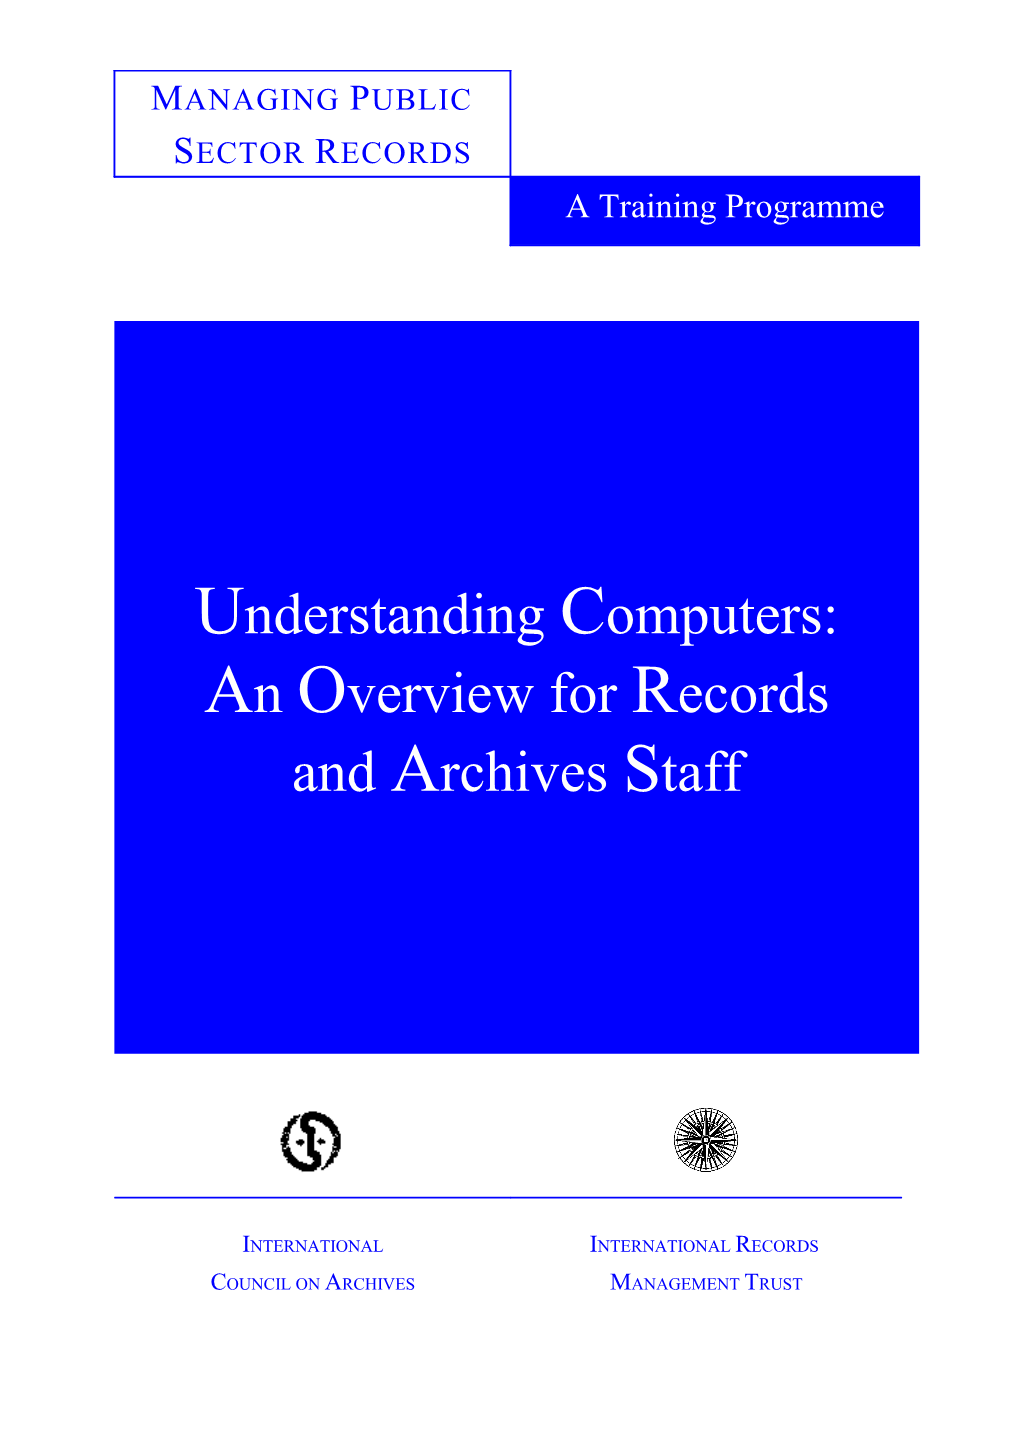 Understanding Computers: an Overview for Records and Archives Staff